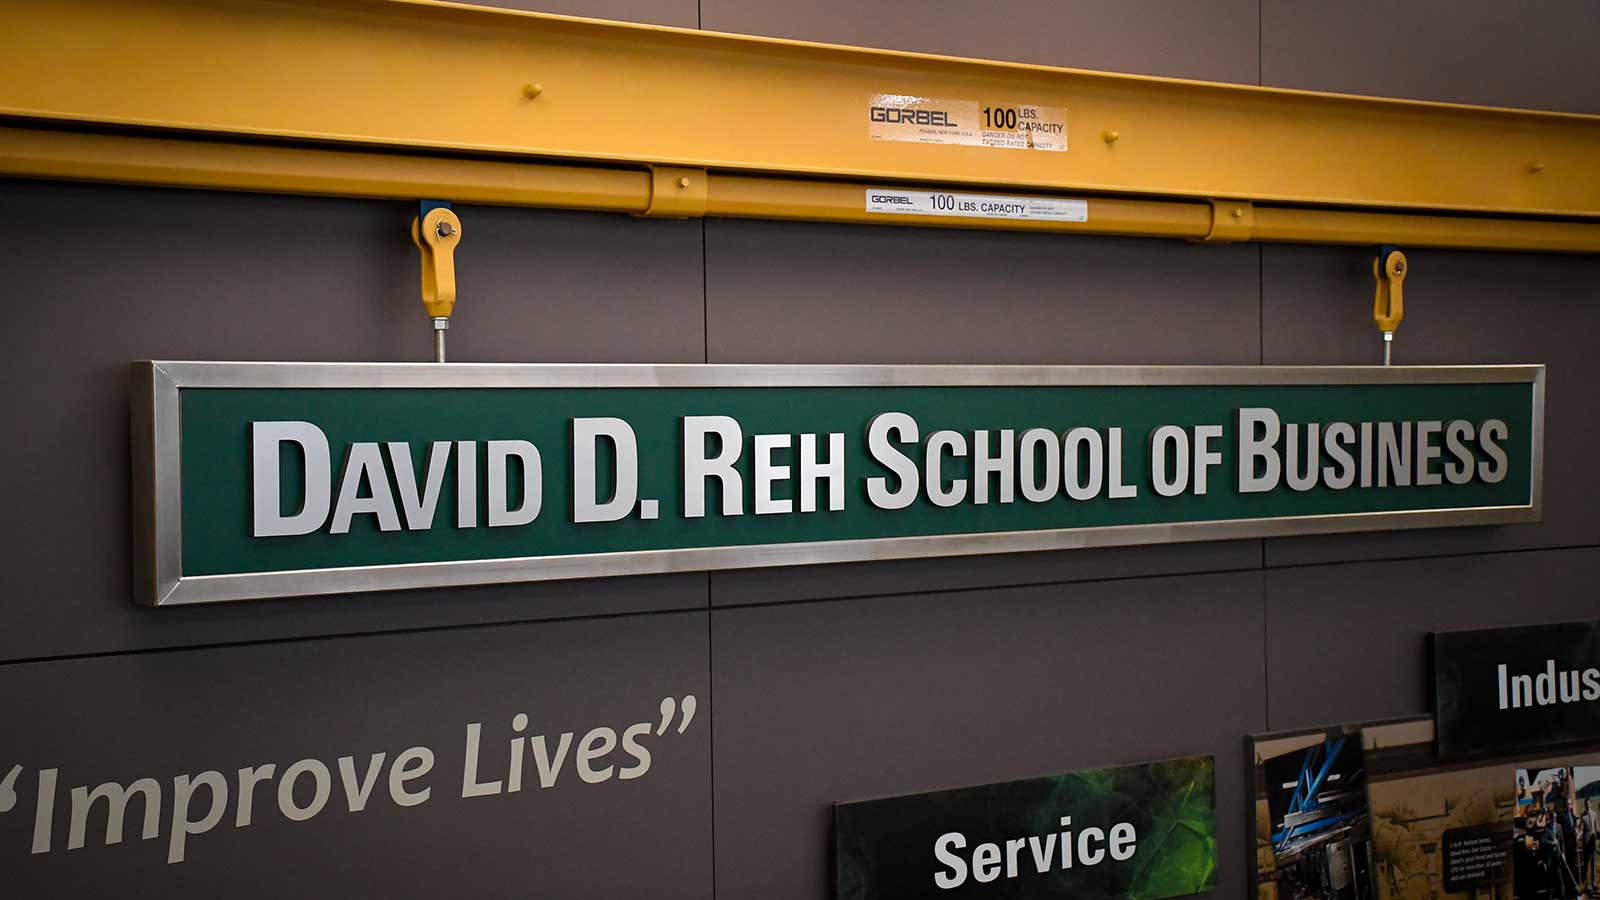 About the David D. Reh School of Business